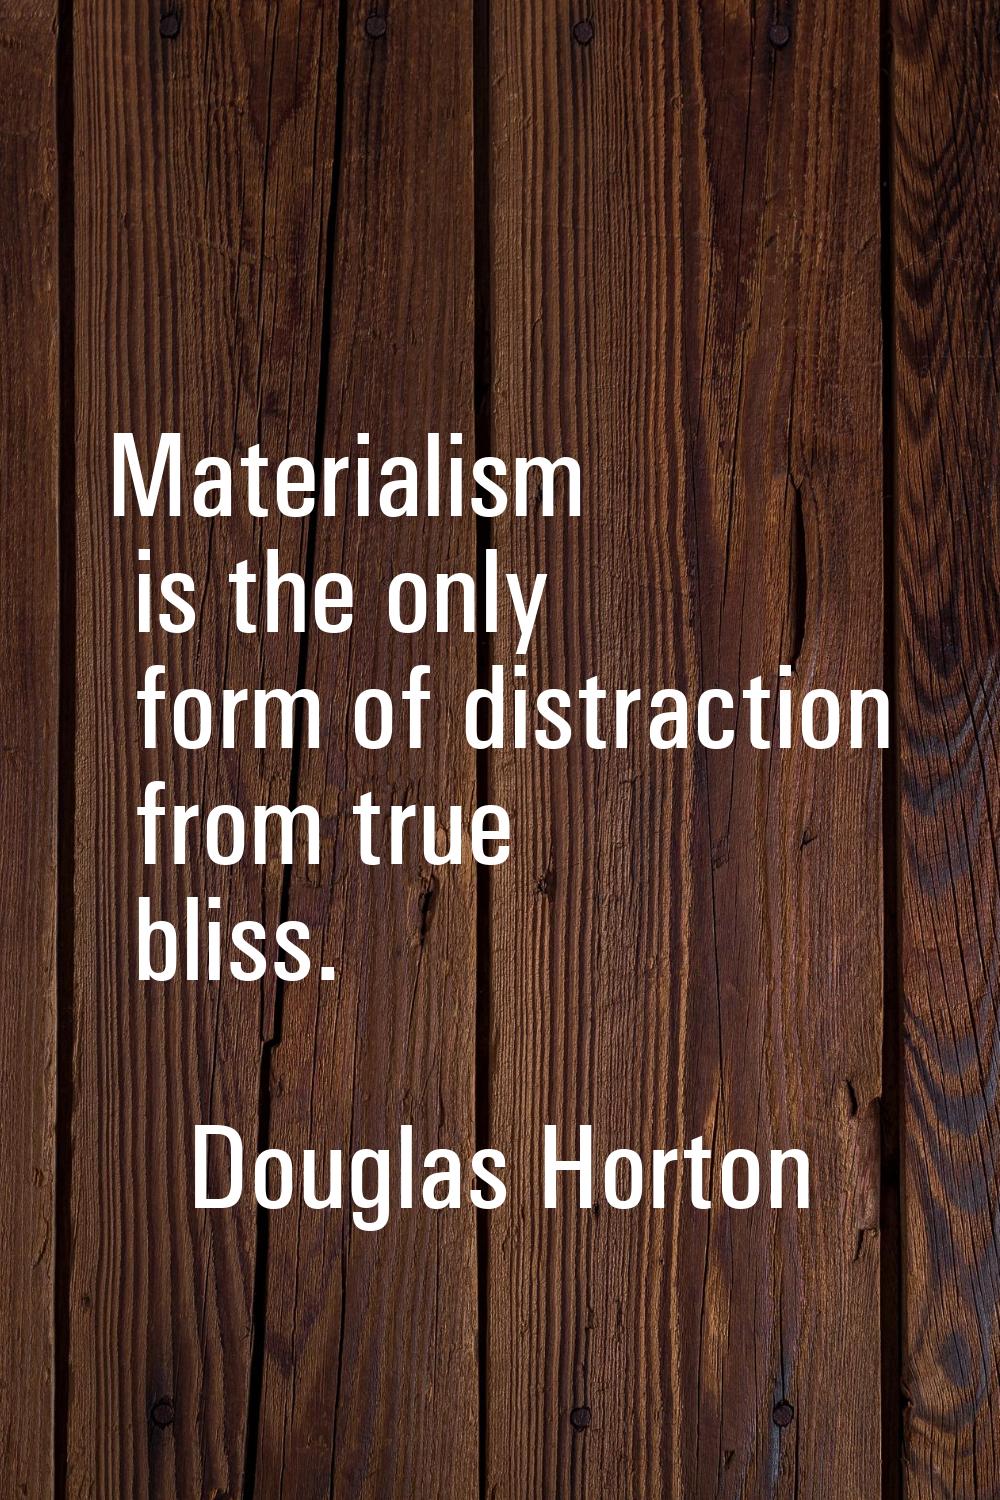 Materialism is the only form of distraction from true bliss.